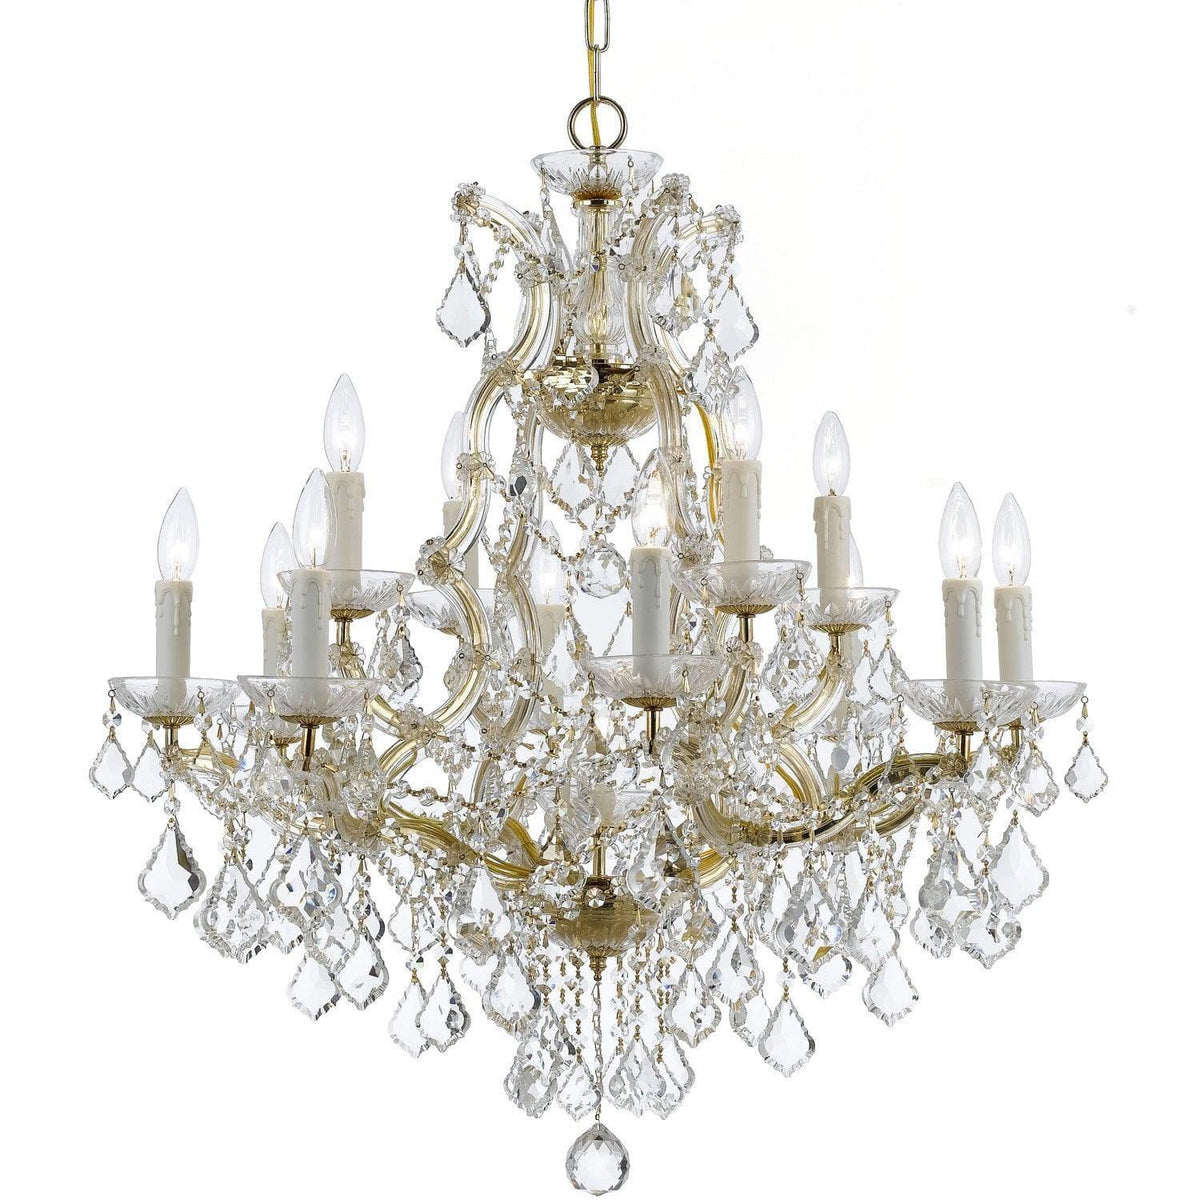 Crystorama - Maria Theresa Chandelier - 4412-GD-CL-S | Montreal Lighting & Hardware